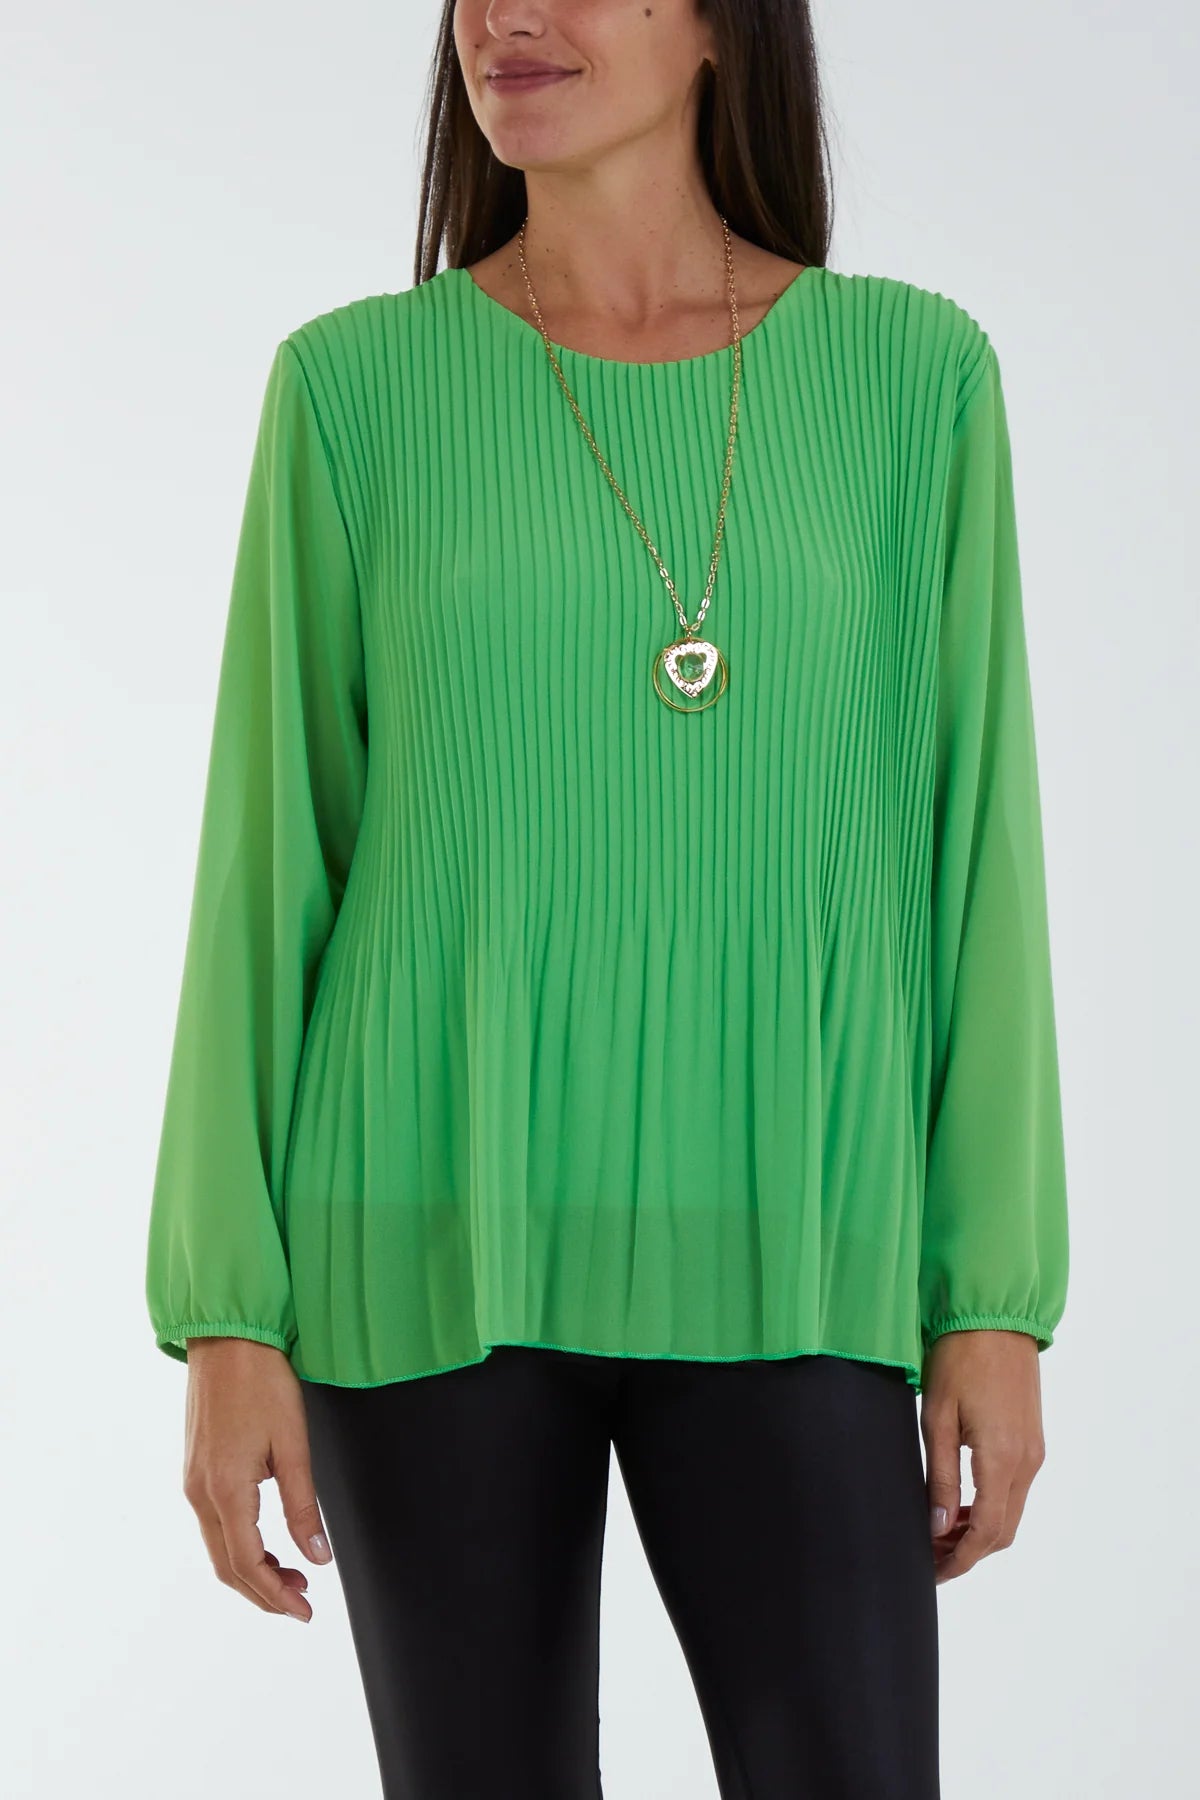 Angie Pleat Blouse Necklace Top